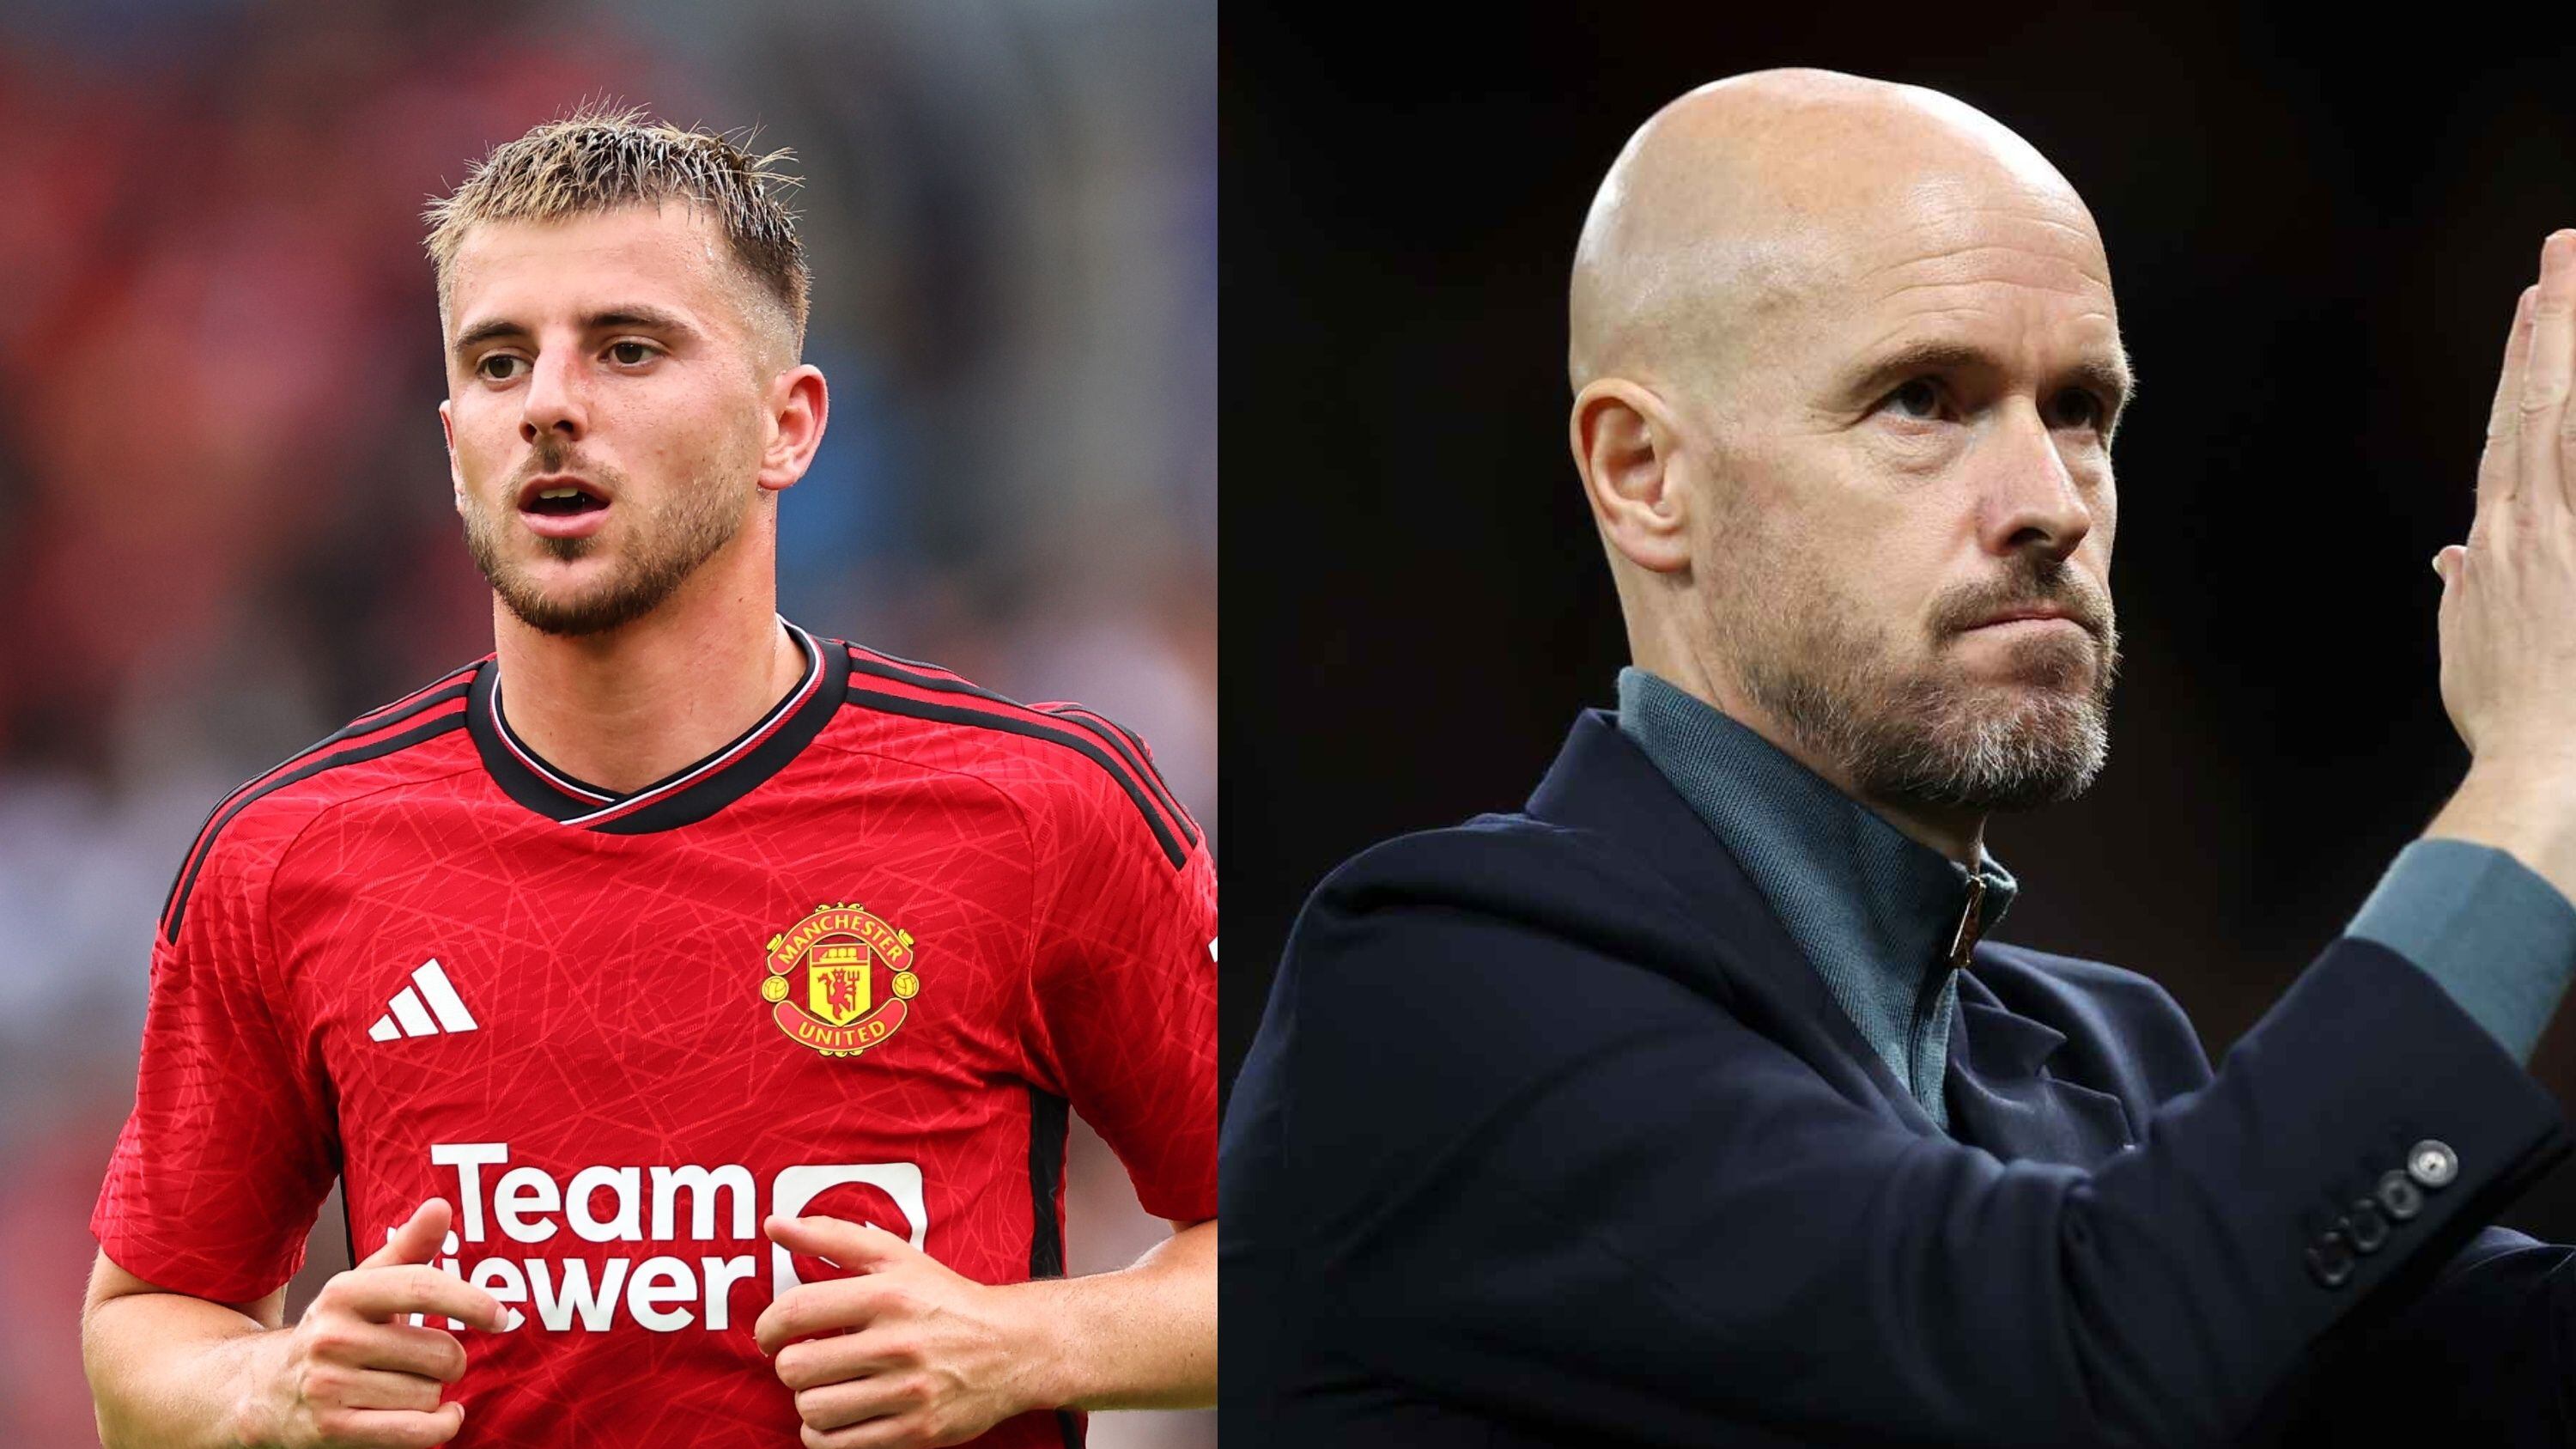 Not Mason Mount, the player who impressed Erik Ten Hag the most in the friendly against Lyon